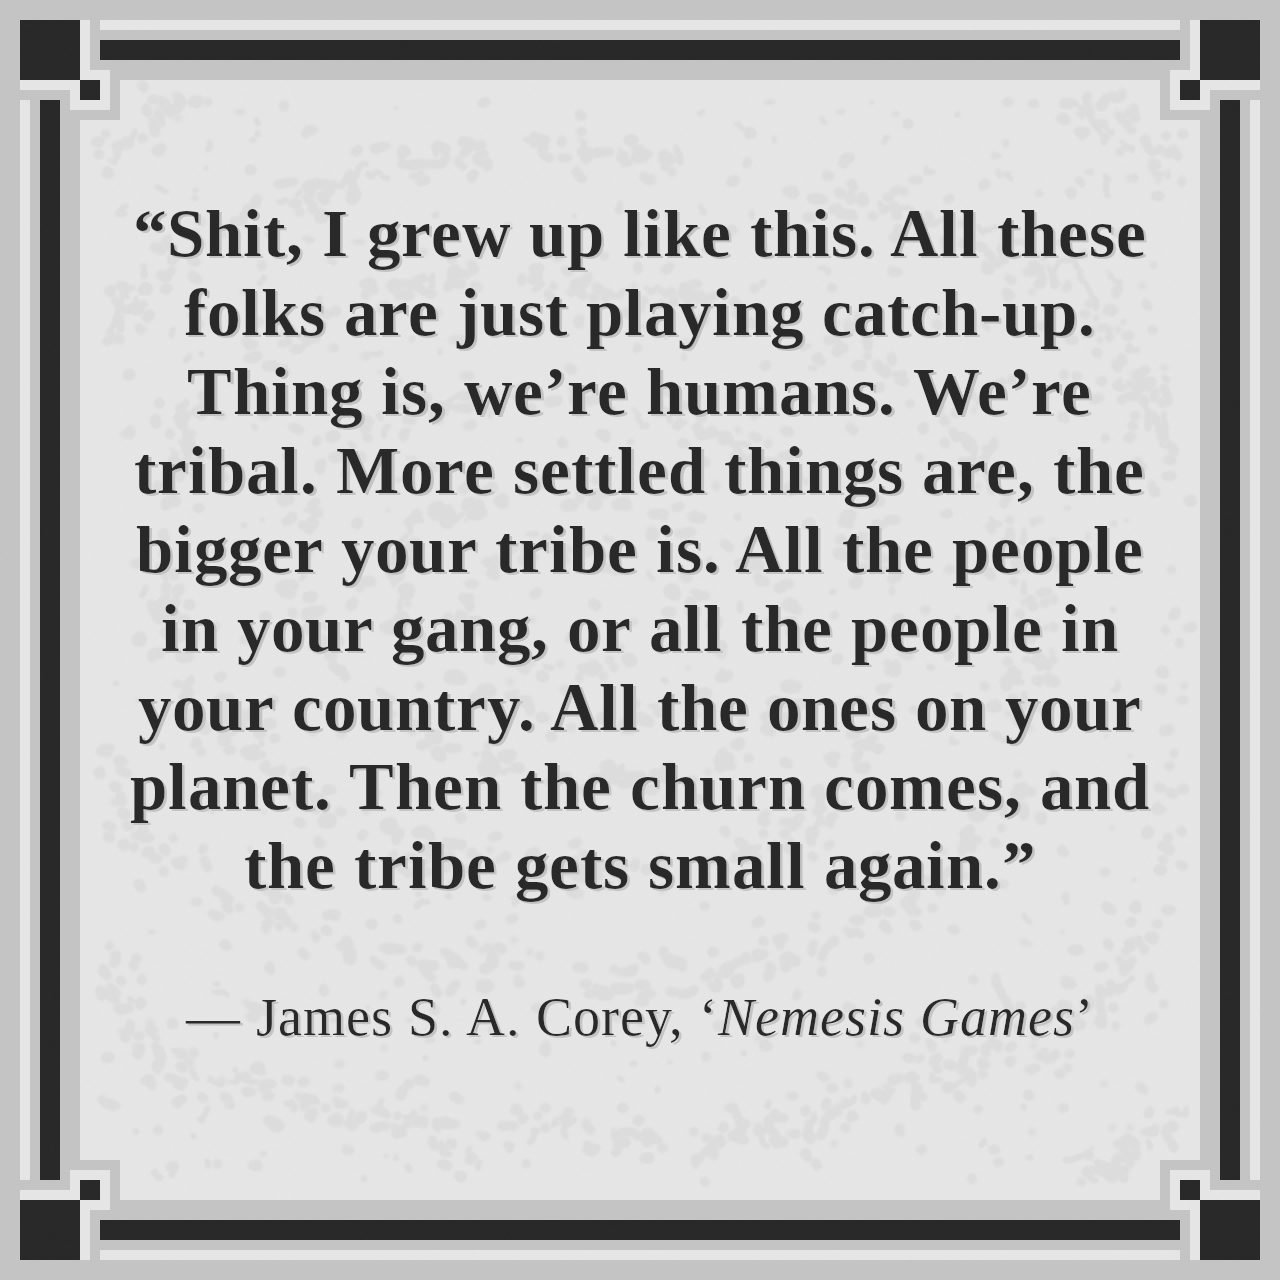 “Shit, I grew up like this. All these folks are just playing catch-up. Thing is, we’re humans. We’re tribal. More settled things are, the bigger your tribe is. All the people in your gang, or all the people in your country. All the ones on your planet. Then the churn comes, and the tribe gets small again.”

— James S. A. Corey, ‘Nemesis Games’